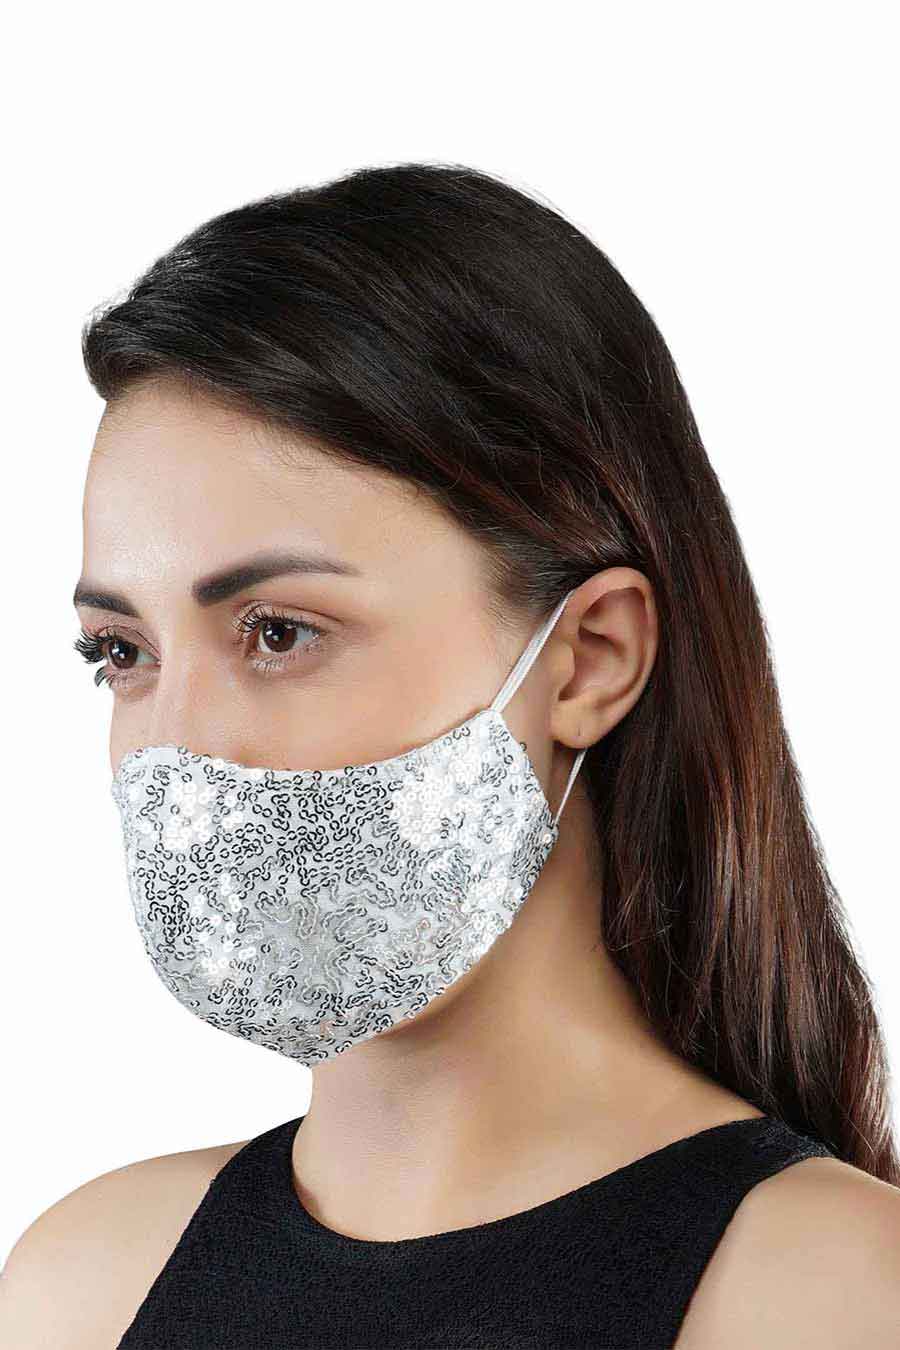 Sequin Embroidered White 3 Ply Mask